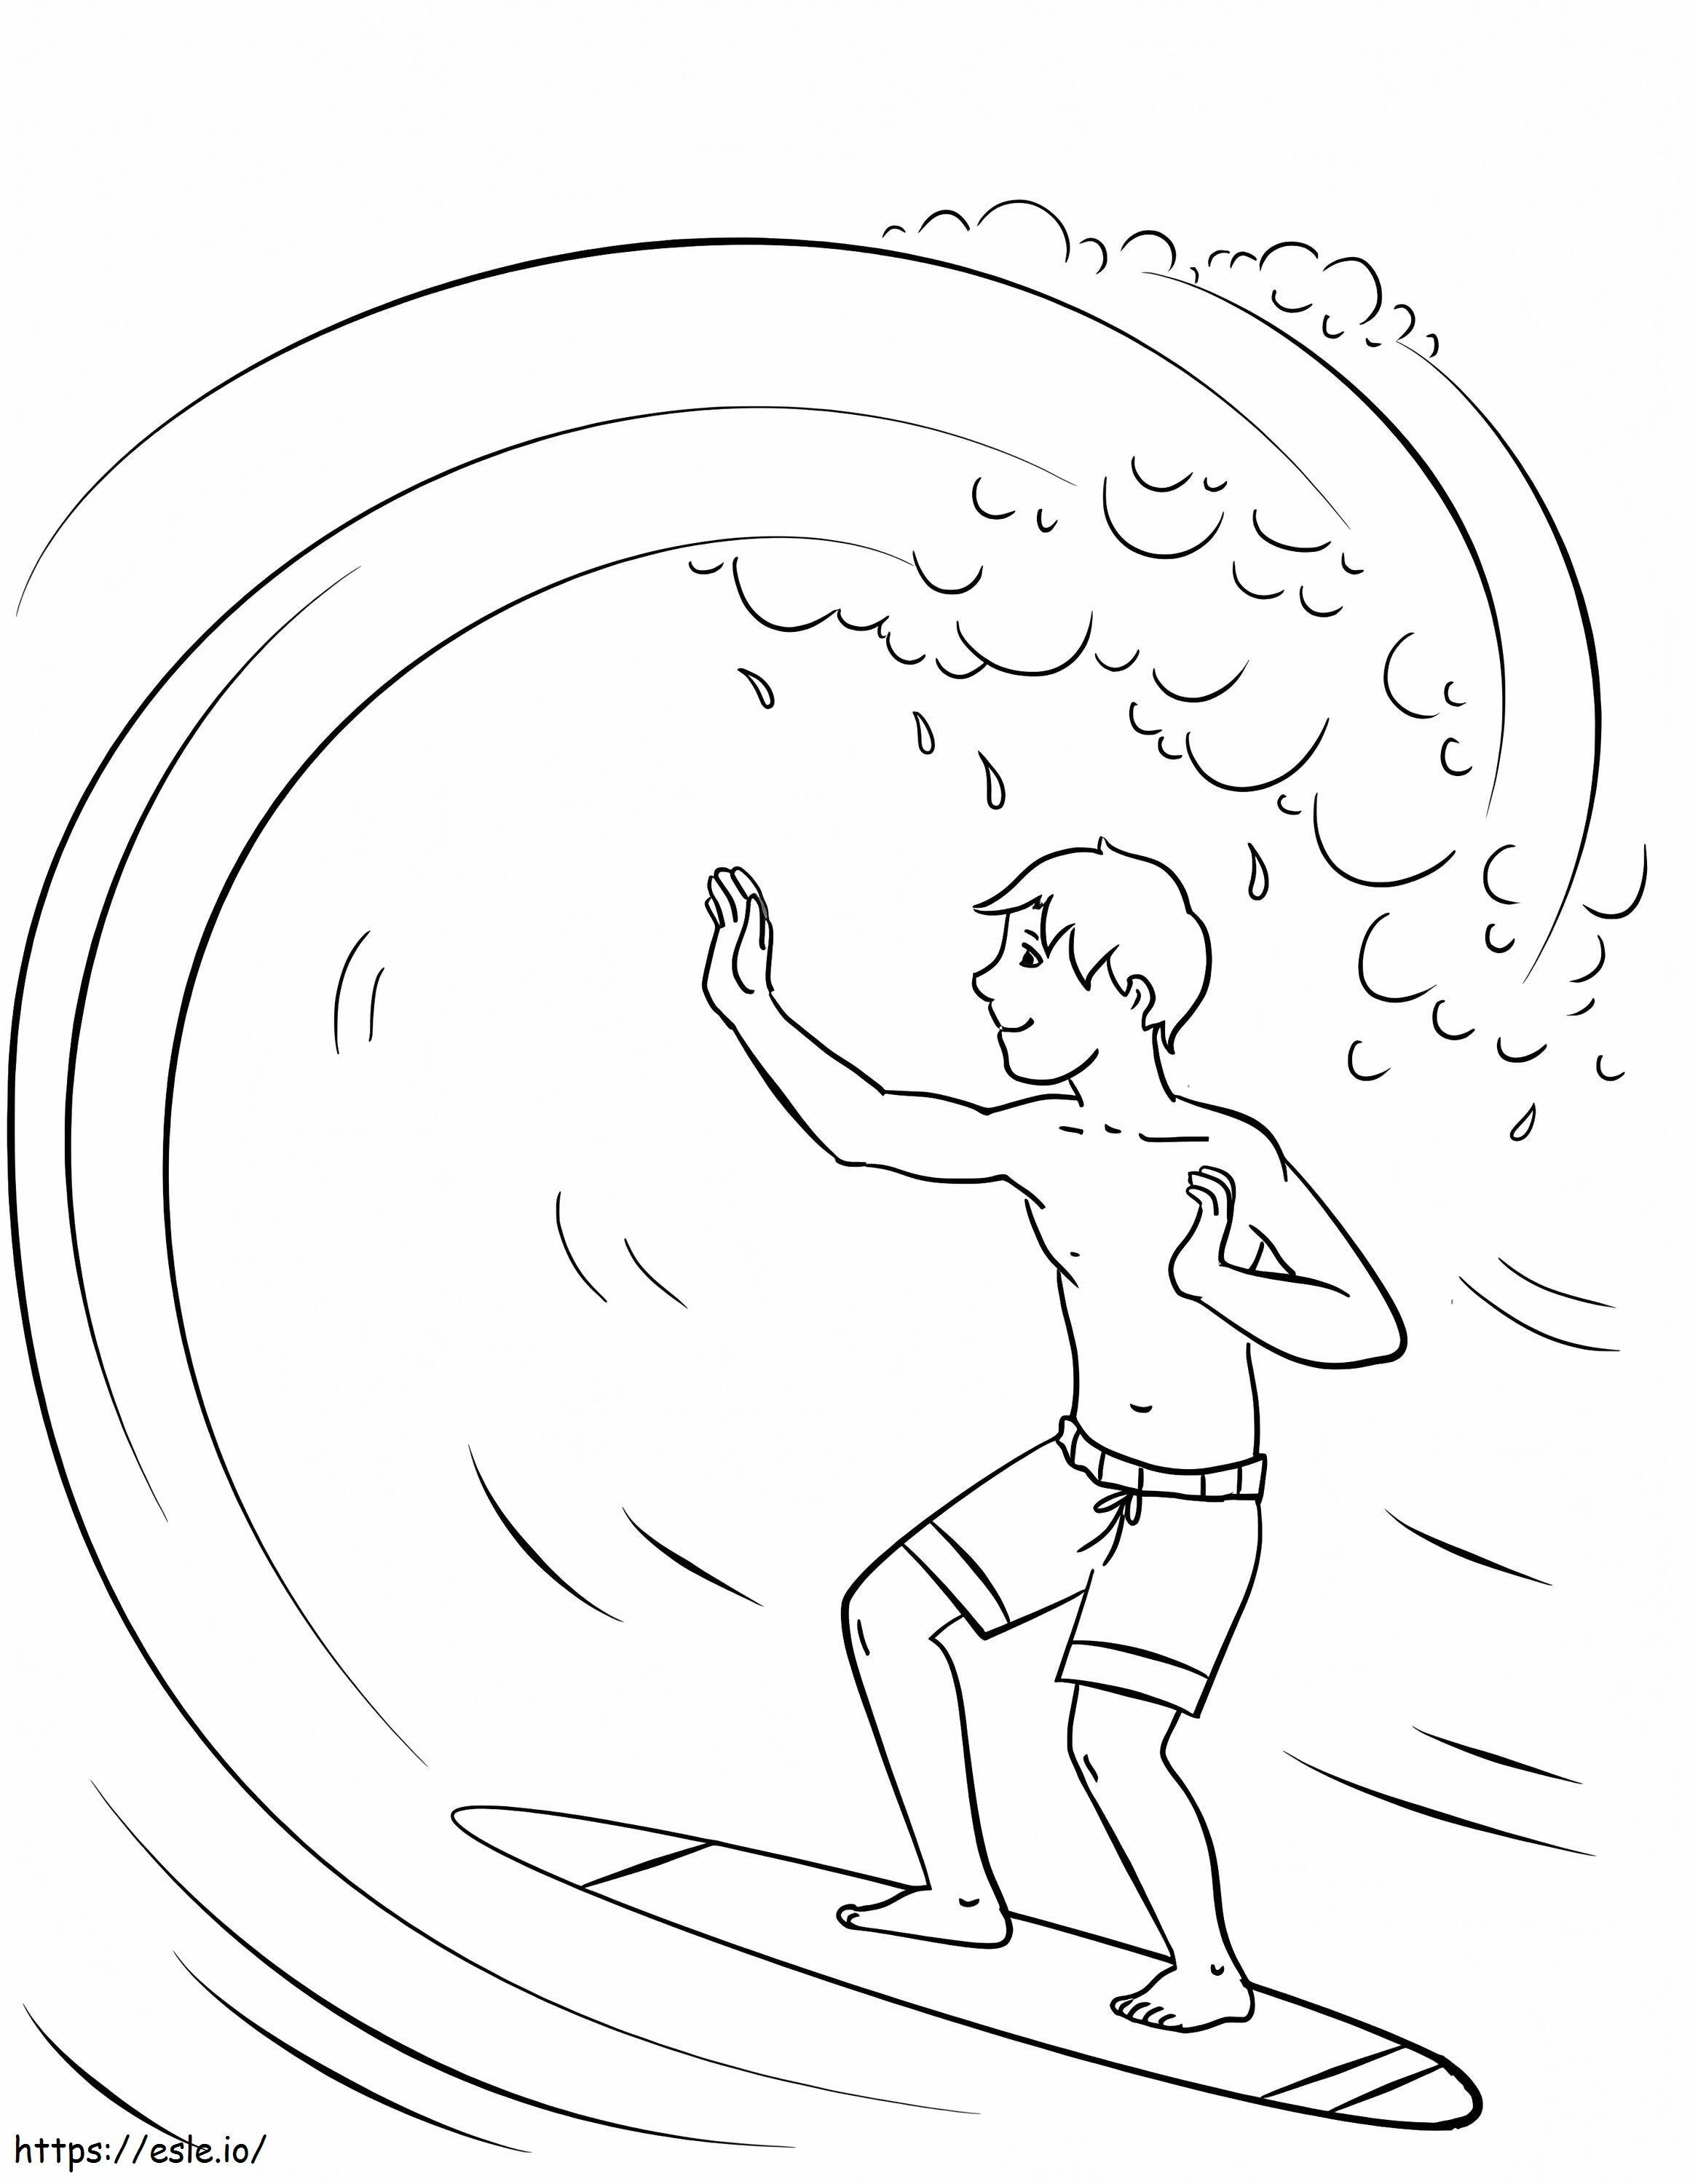 Surfing Boy coloring page